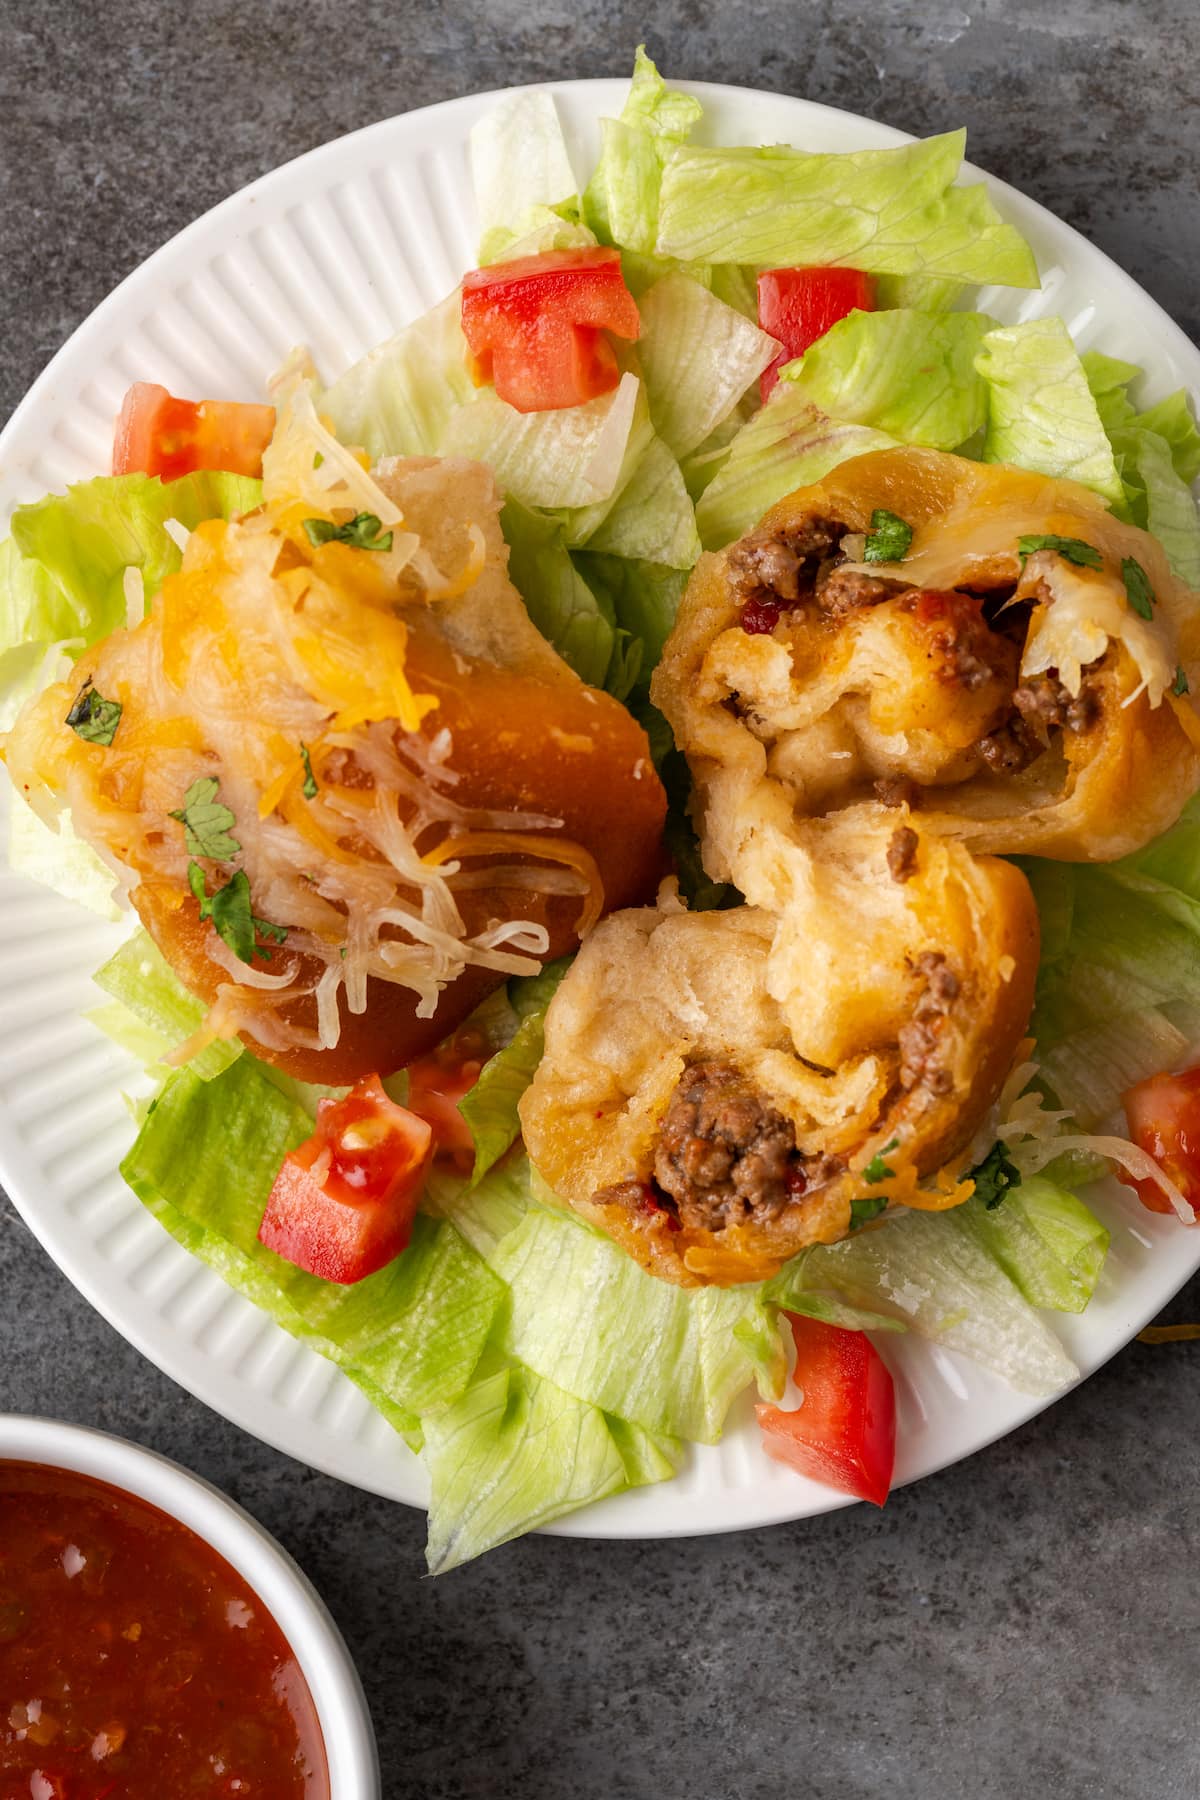 Overhead view of two taco monkey bread bites on top of shredded lettuce and diced tomatoes on a white plate, with one bread piece torn open to reveal the taco filling.